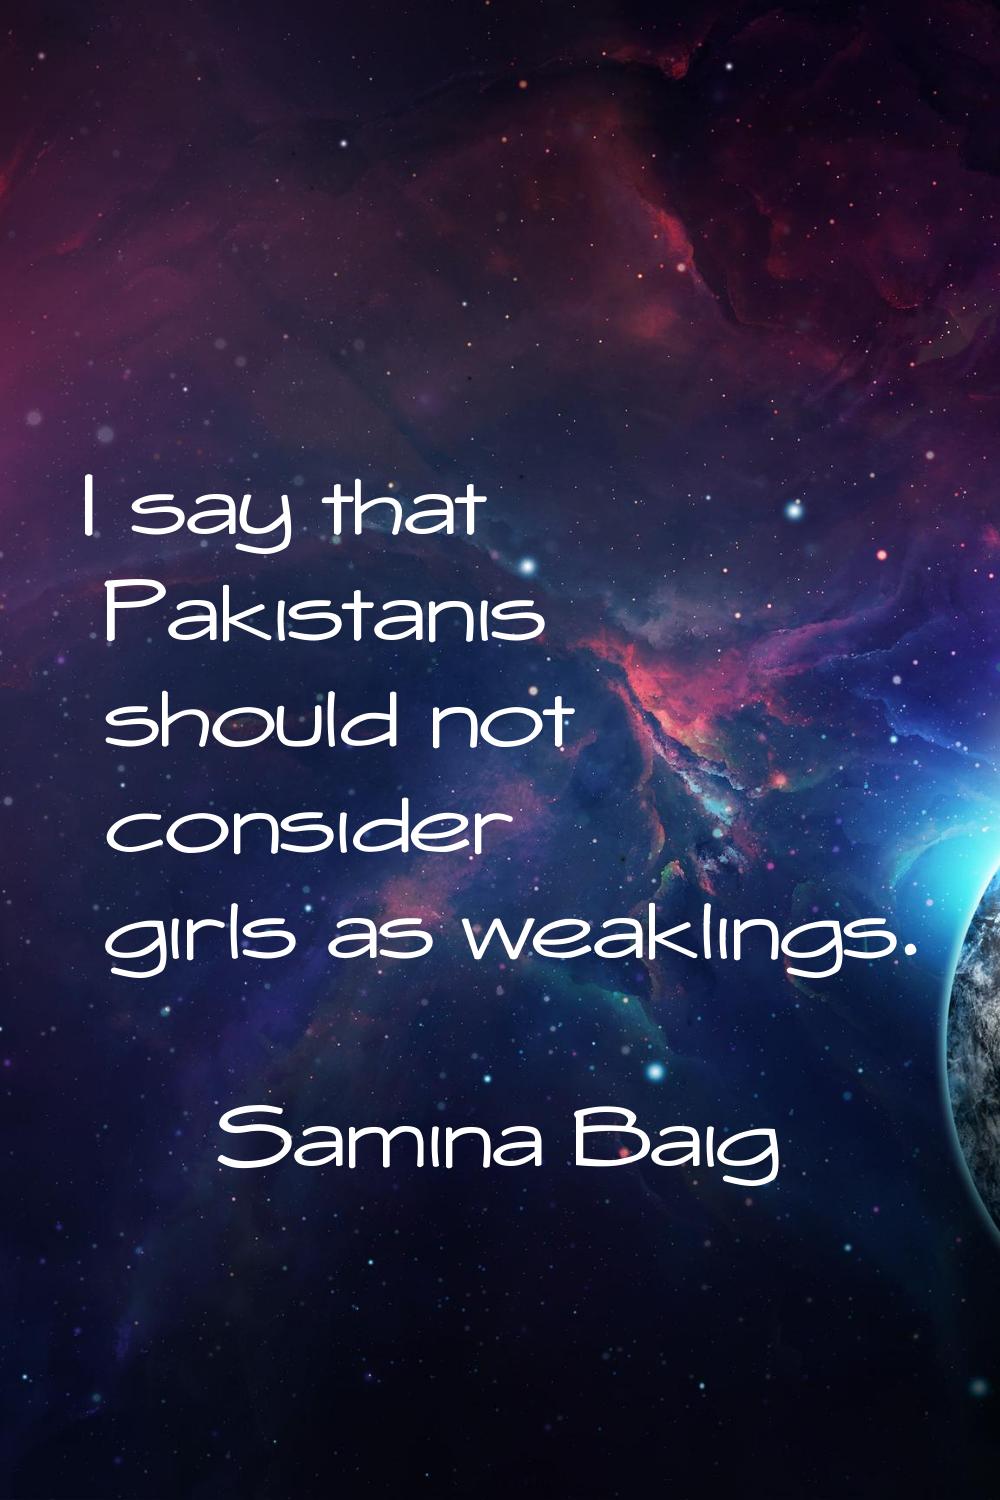 I say that Pakistanis should not consider girls as weaklings.